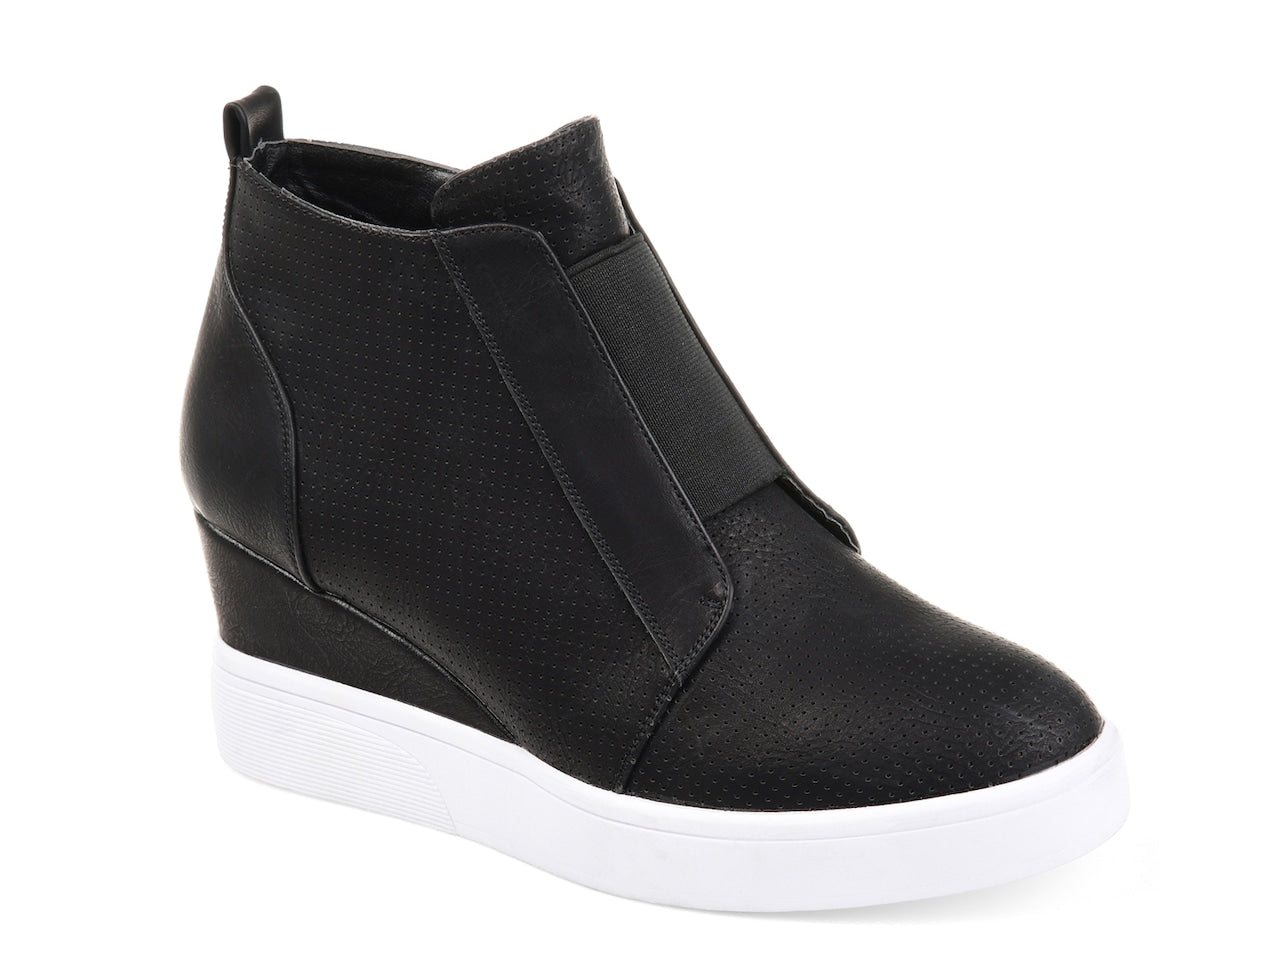 Mia Christie Wedge Ankle Boots